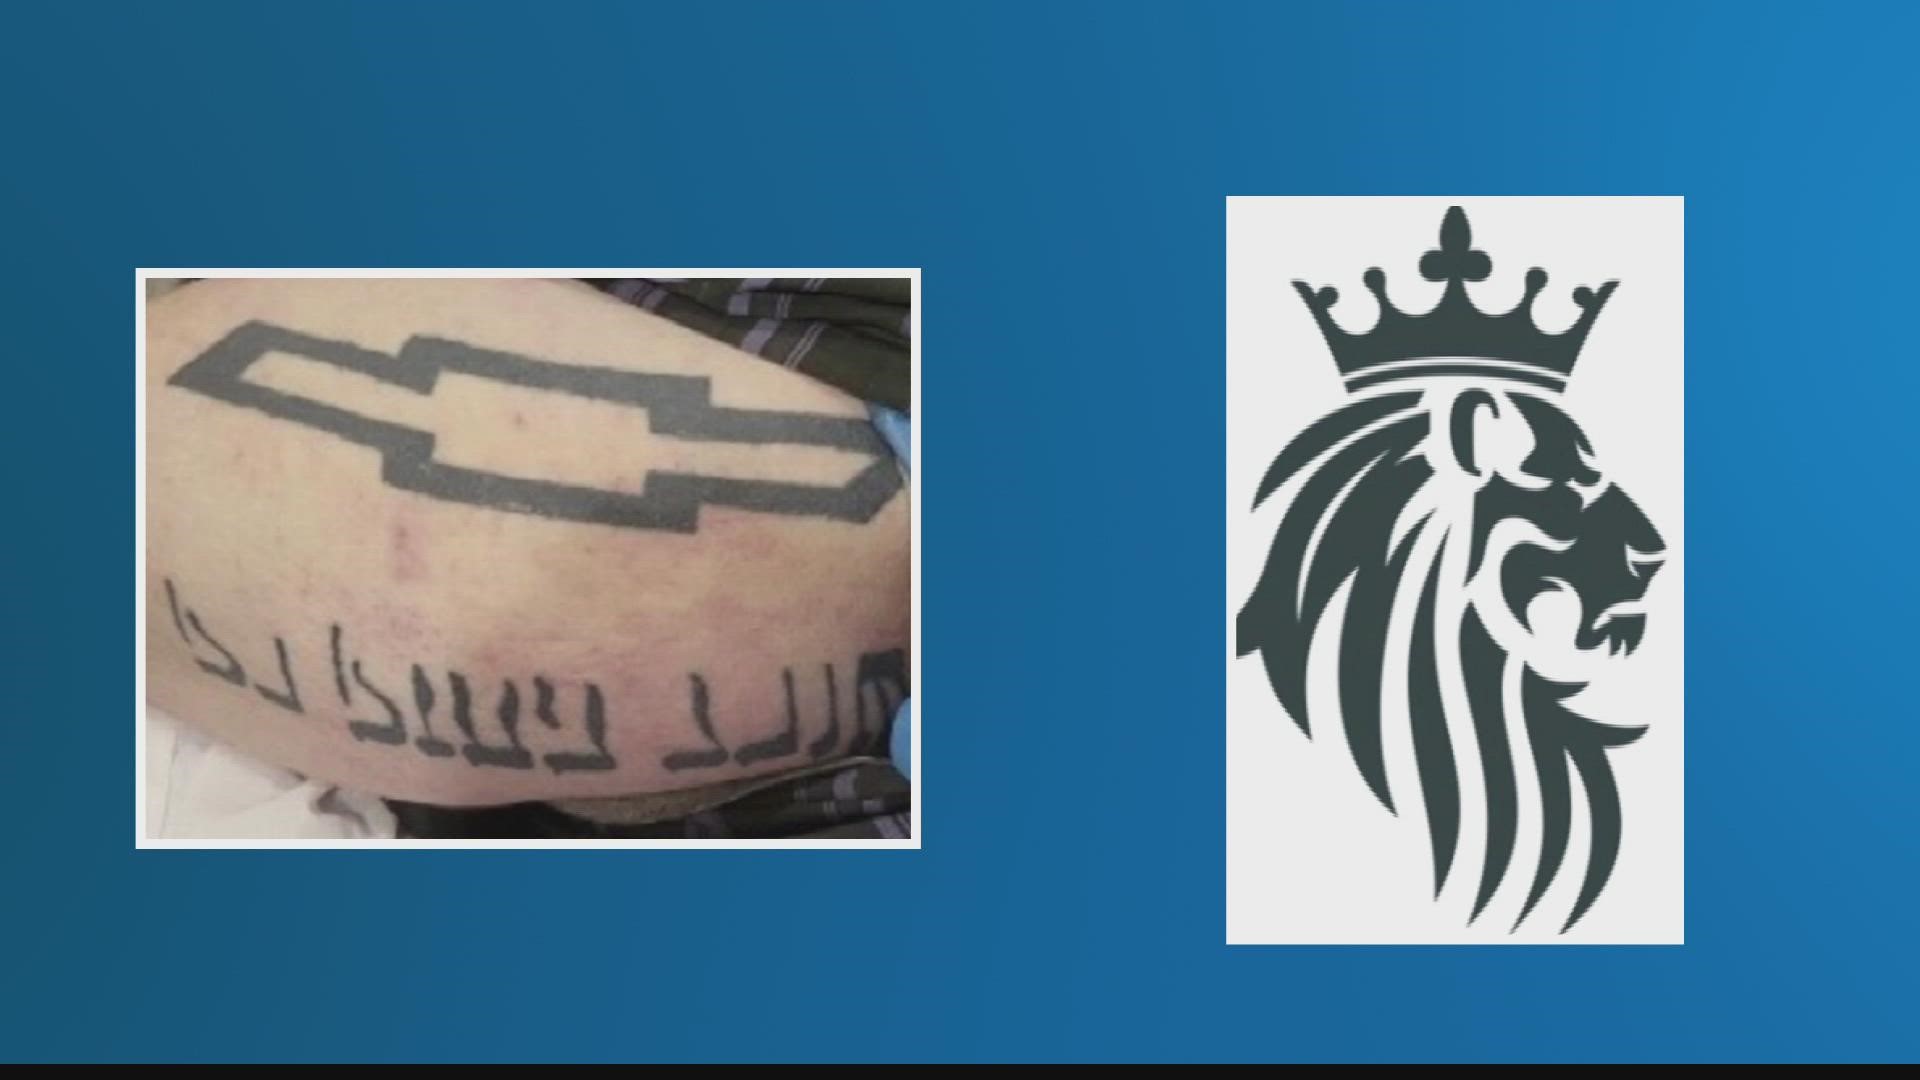 The Jacksonville Sheriff's Office is searching for a man with the Chevy logo and a lion head wearing a crown on his forearm.